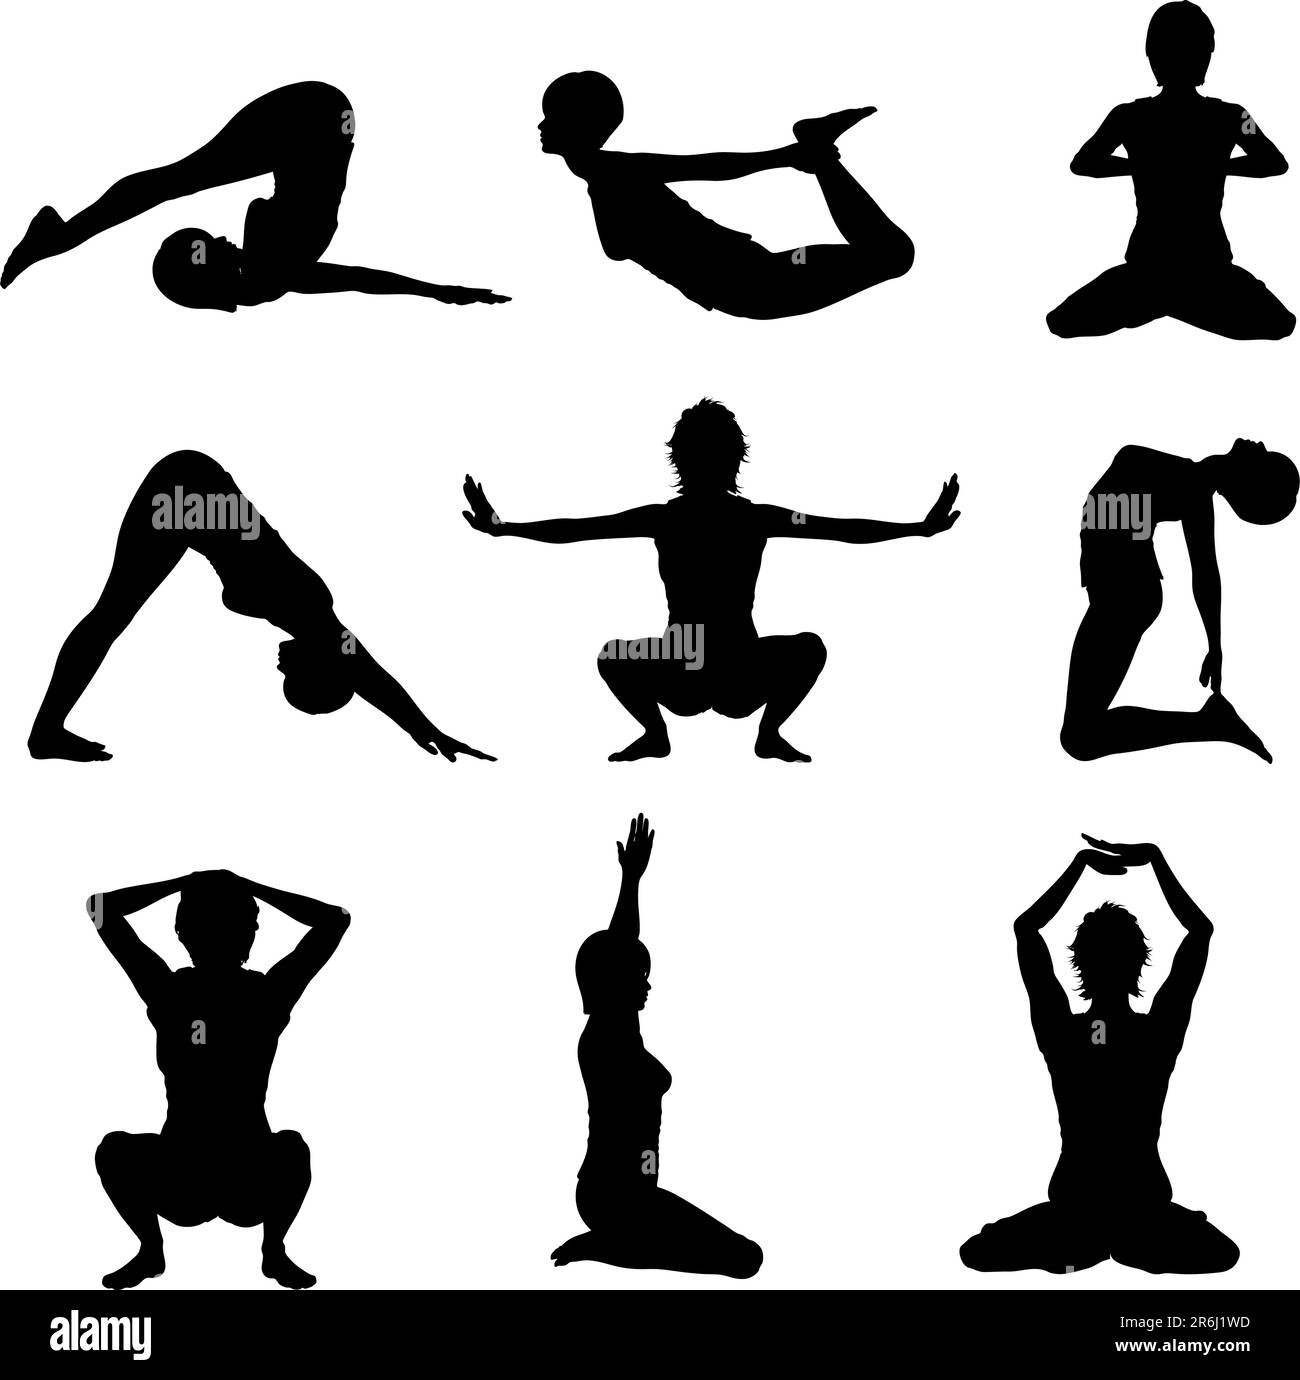 Silhouettes of females in various yoga poses Stock Vector